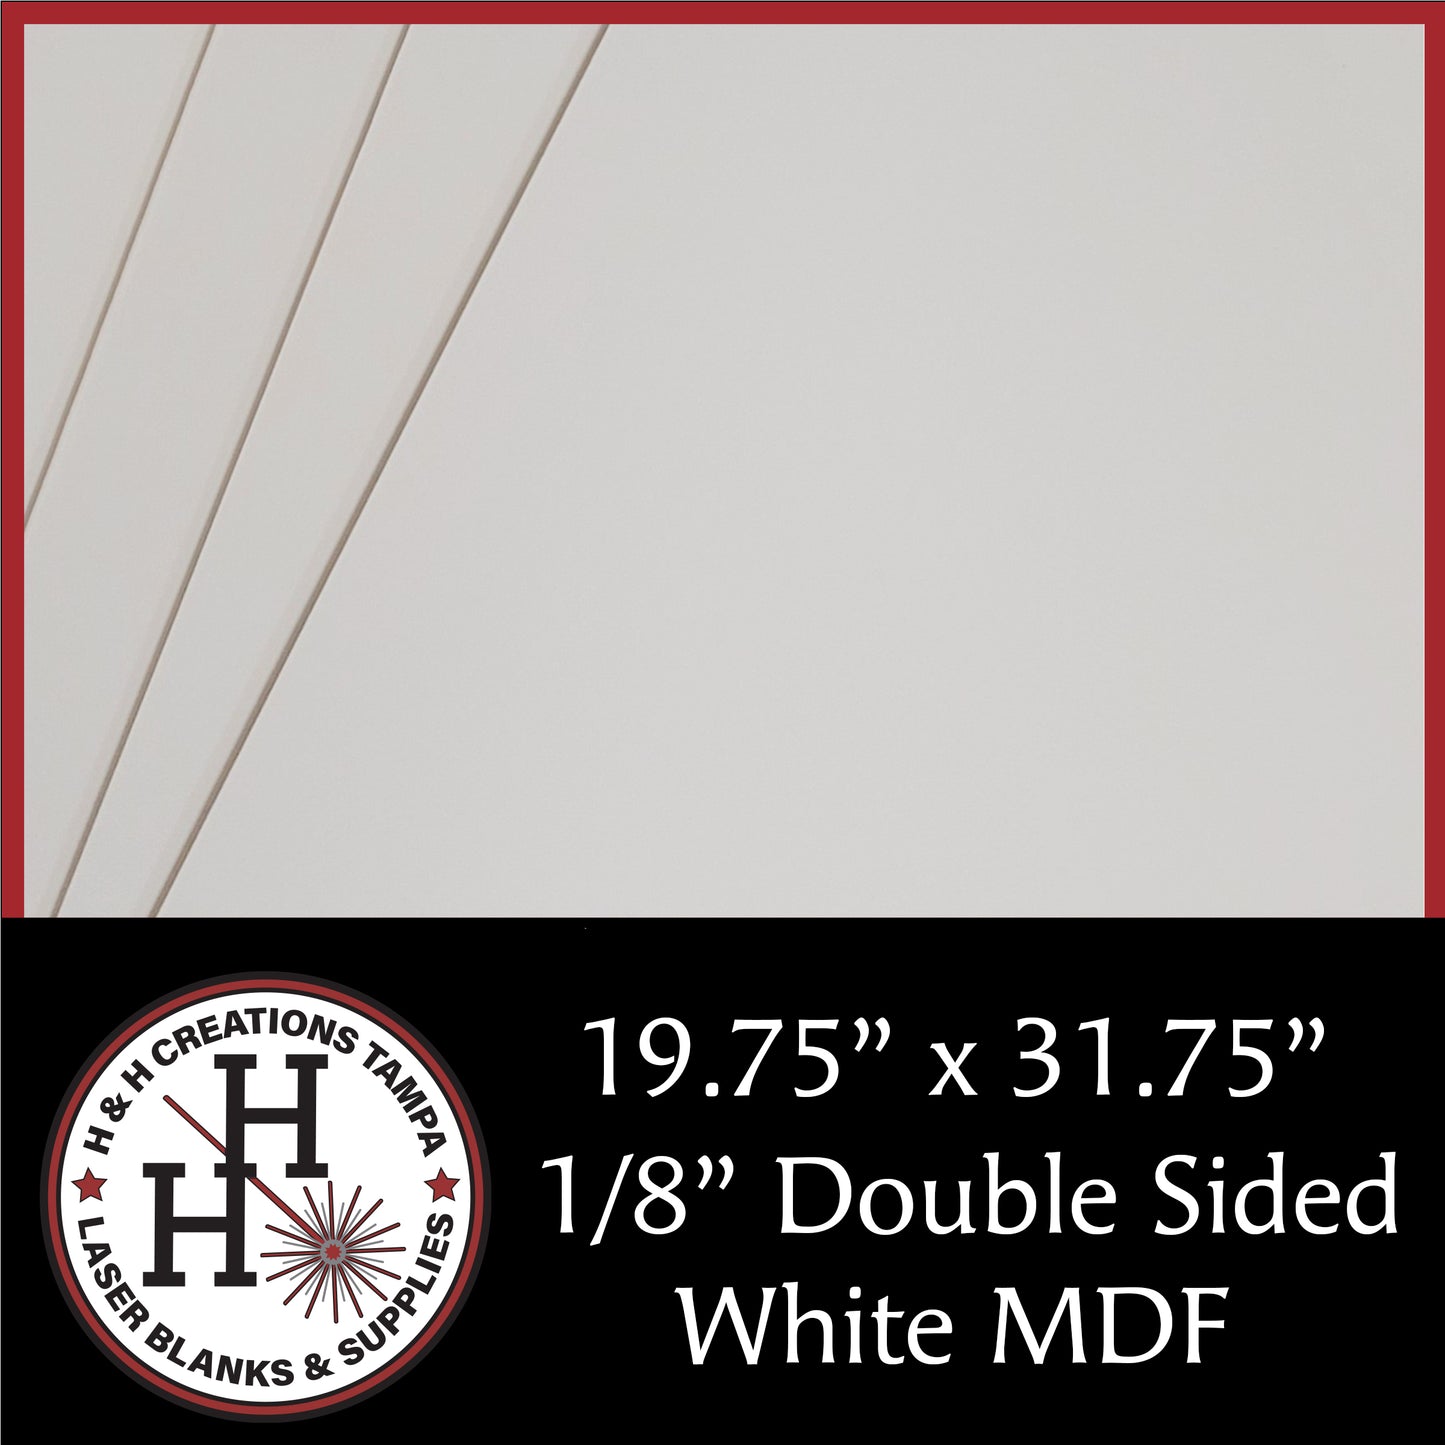 LOCAL PICK UP ONLY - 1/8" Premium Double-Sided White MDF/HDF Draft Board 19.75" x 31.75"